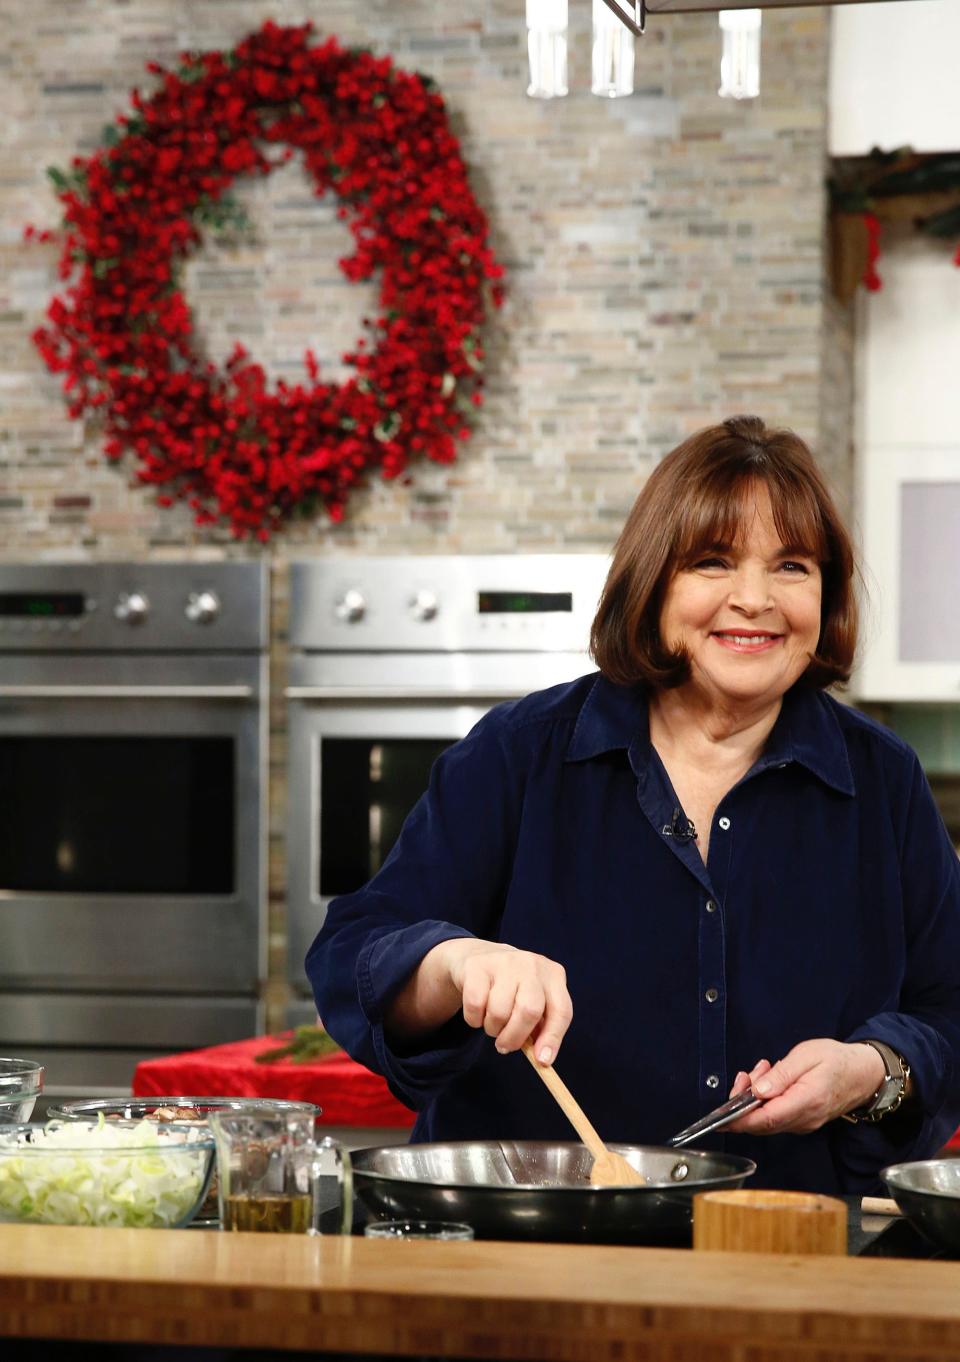 Ina Garten in a kitchen, smiling and stirring something in a pan with a wooden spoon.